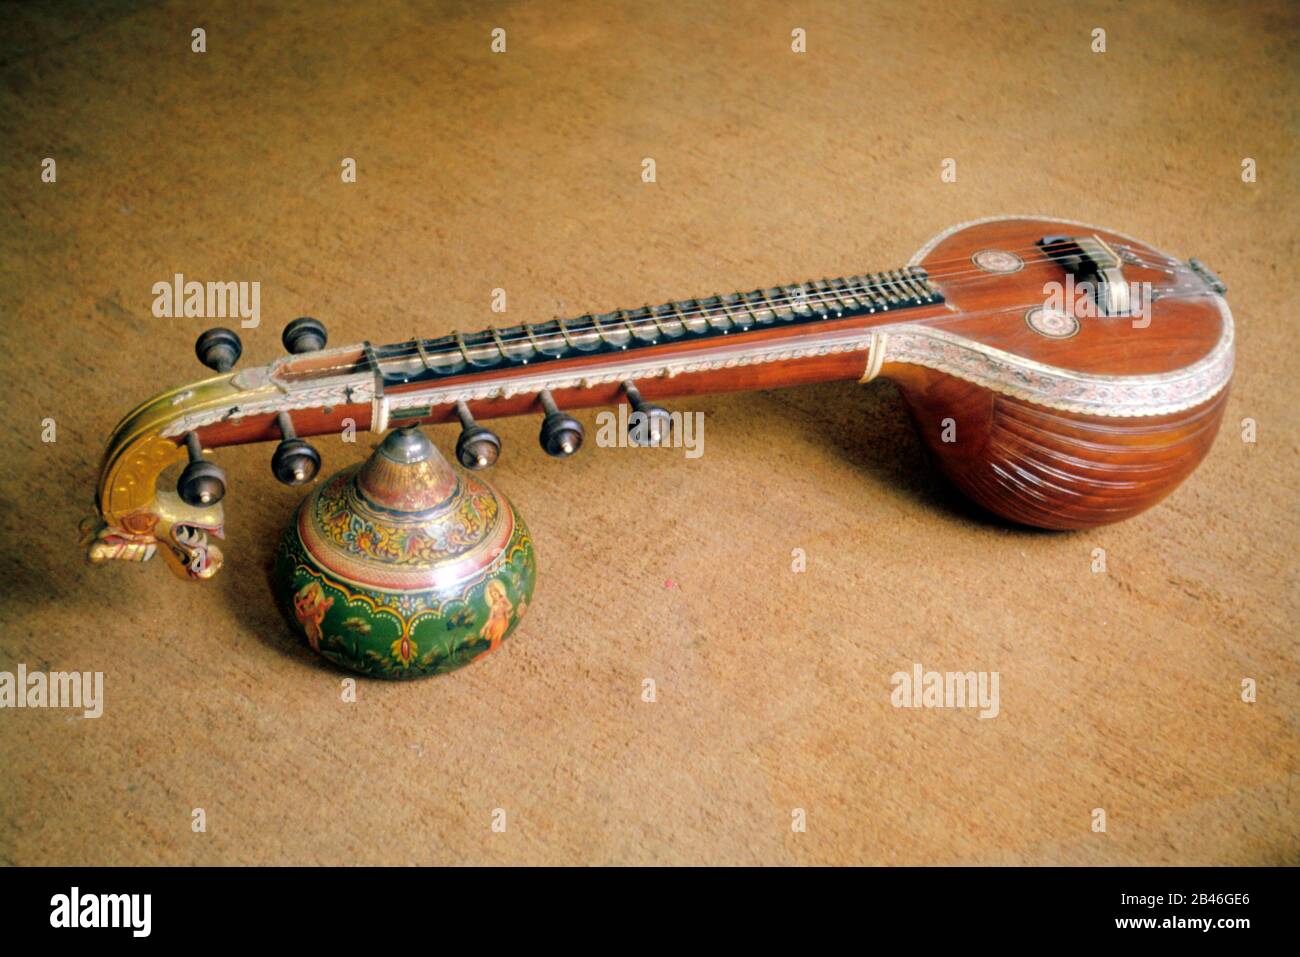 Veena Indian classical musical instrument India Asia Asian musical instruments Stock Photo